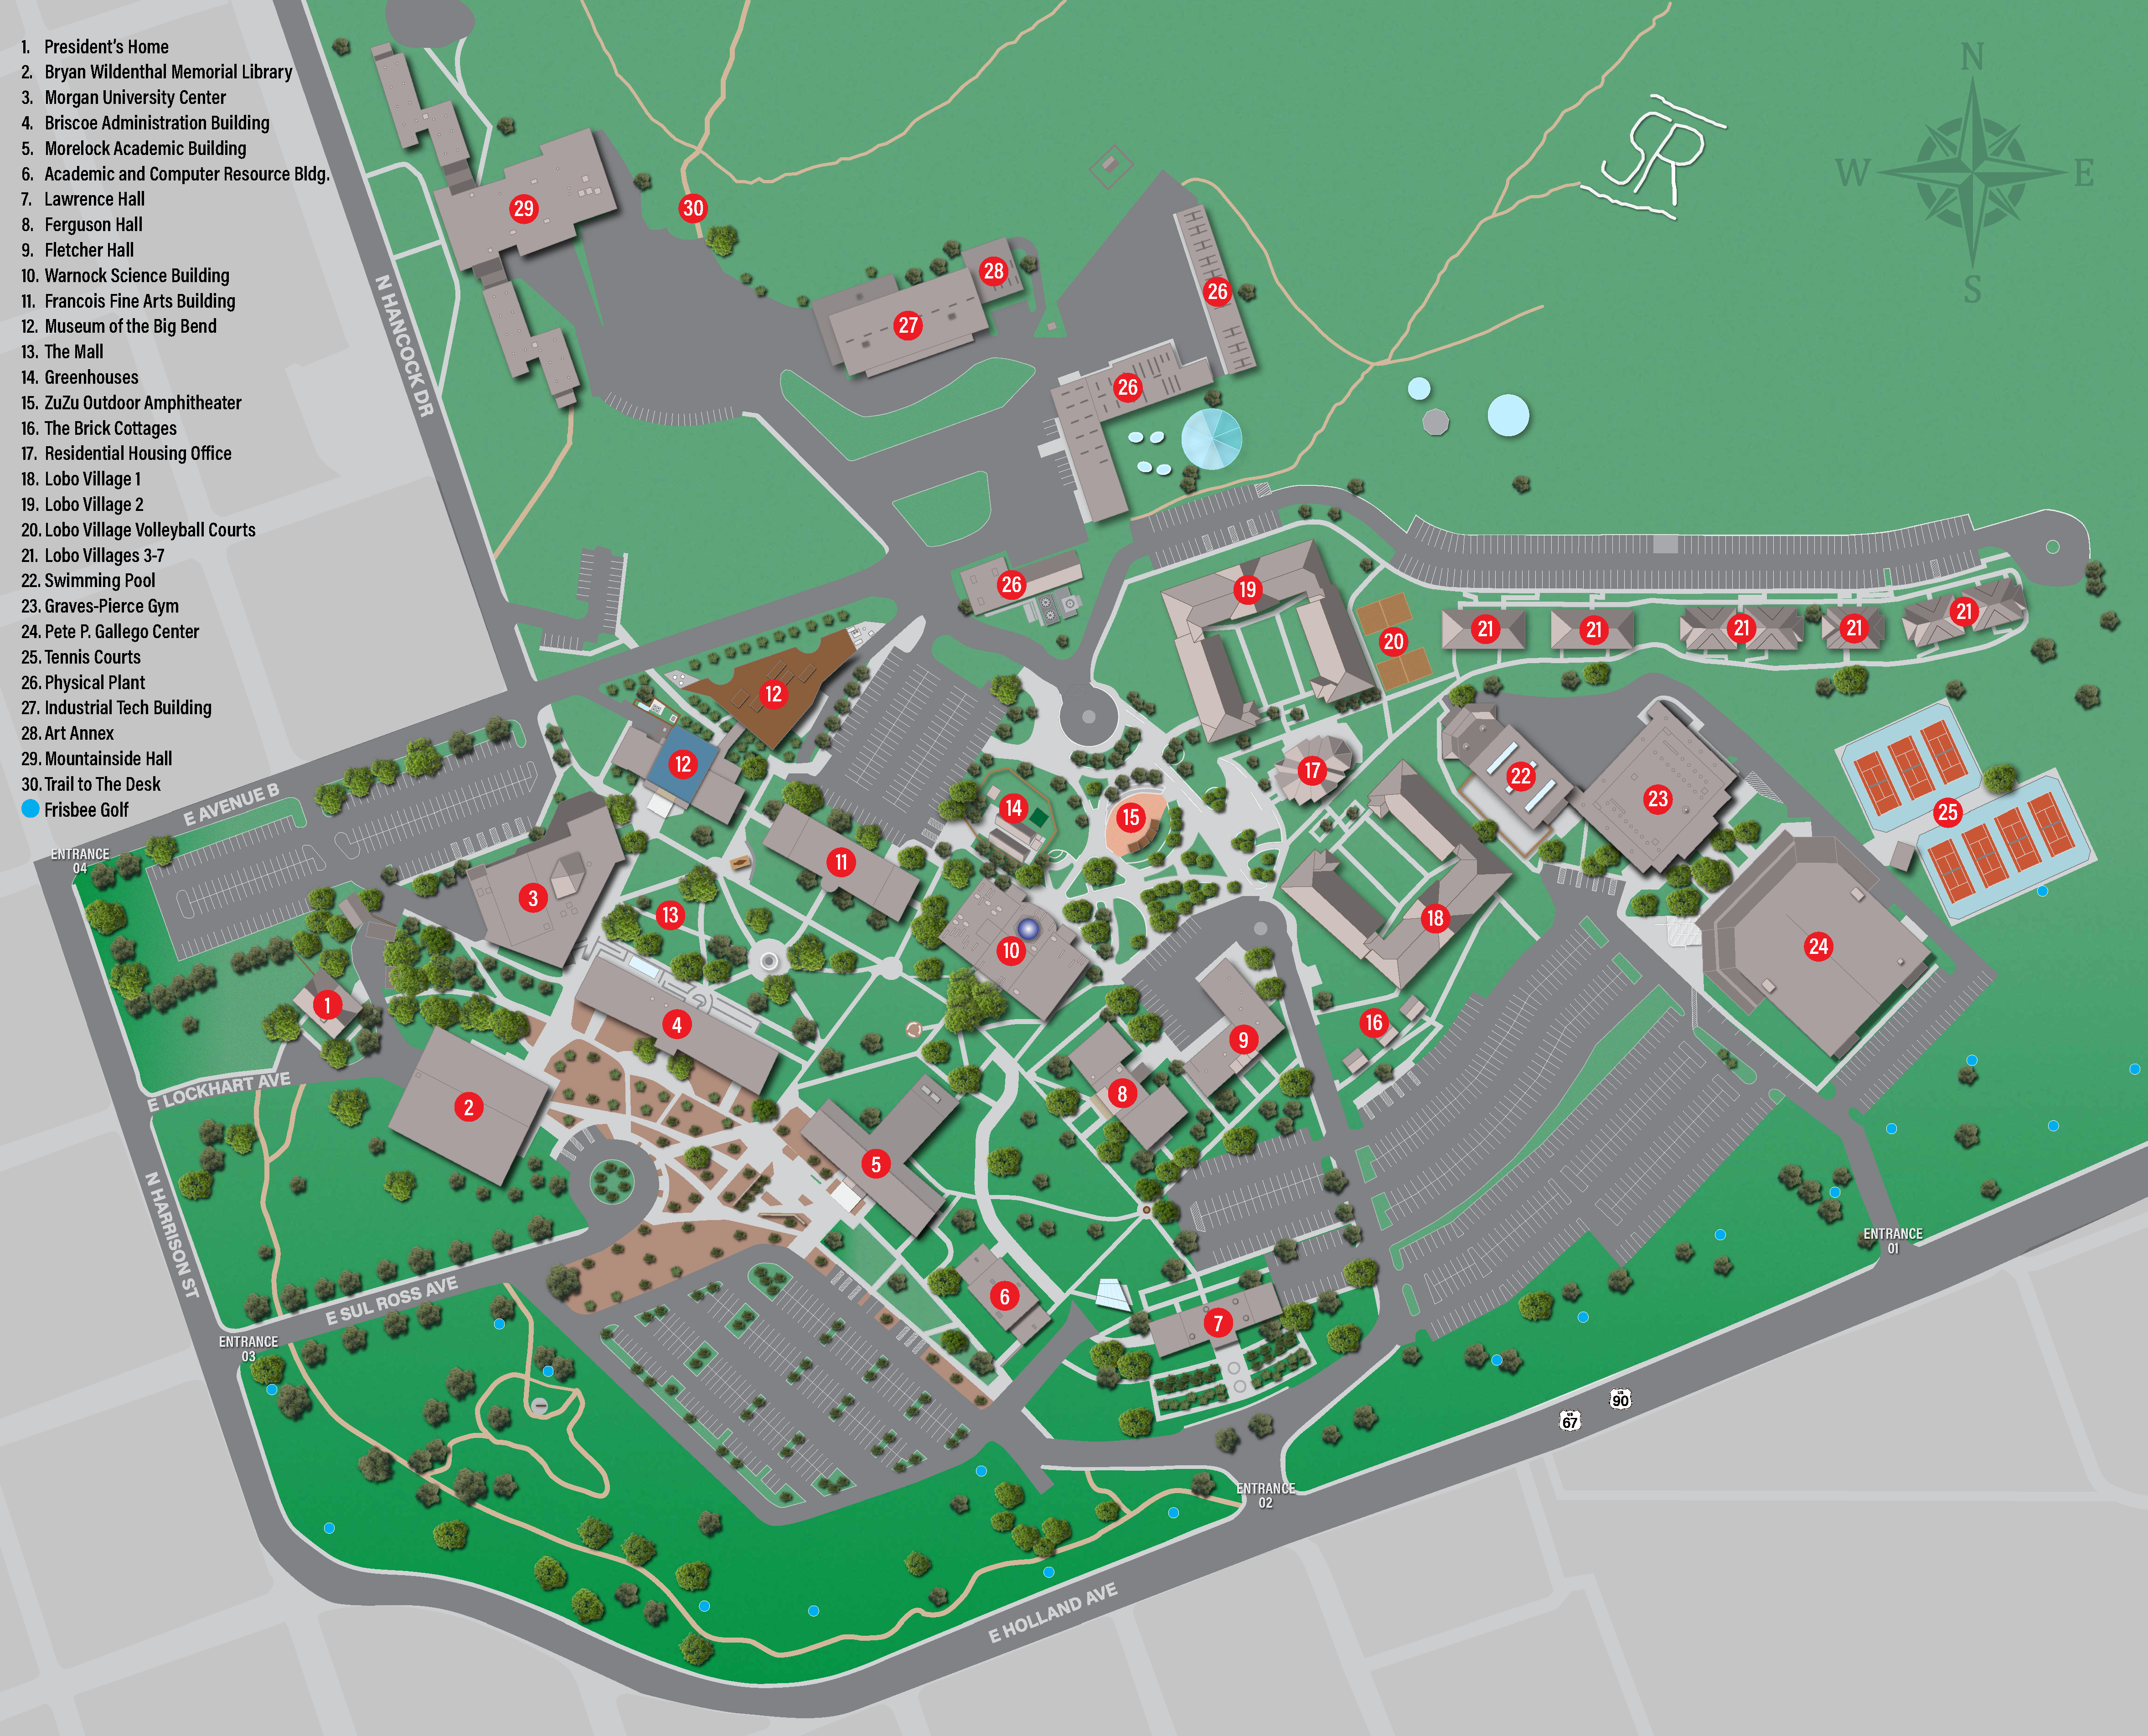 Map of the Alpine Campus including all academic buildings, dorms, and additional points of interest available on campus.